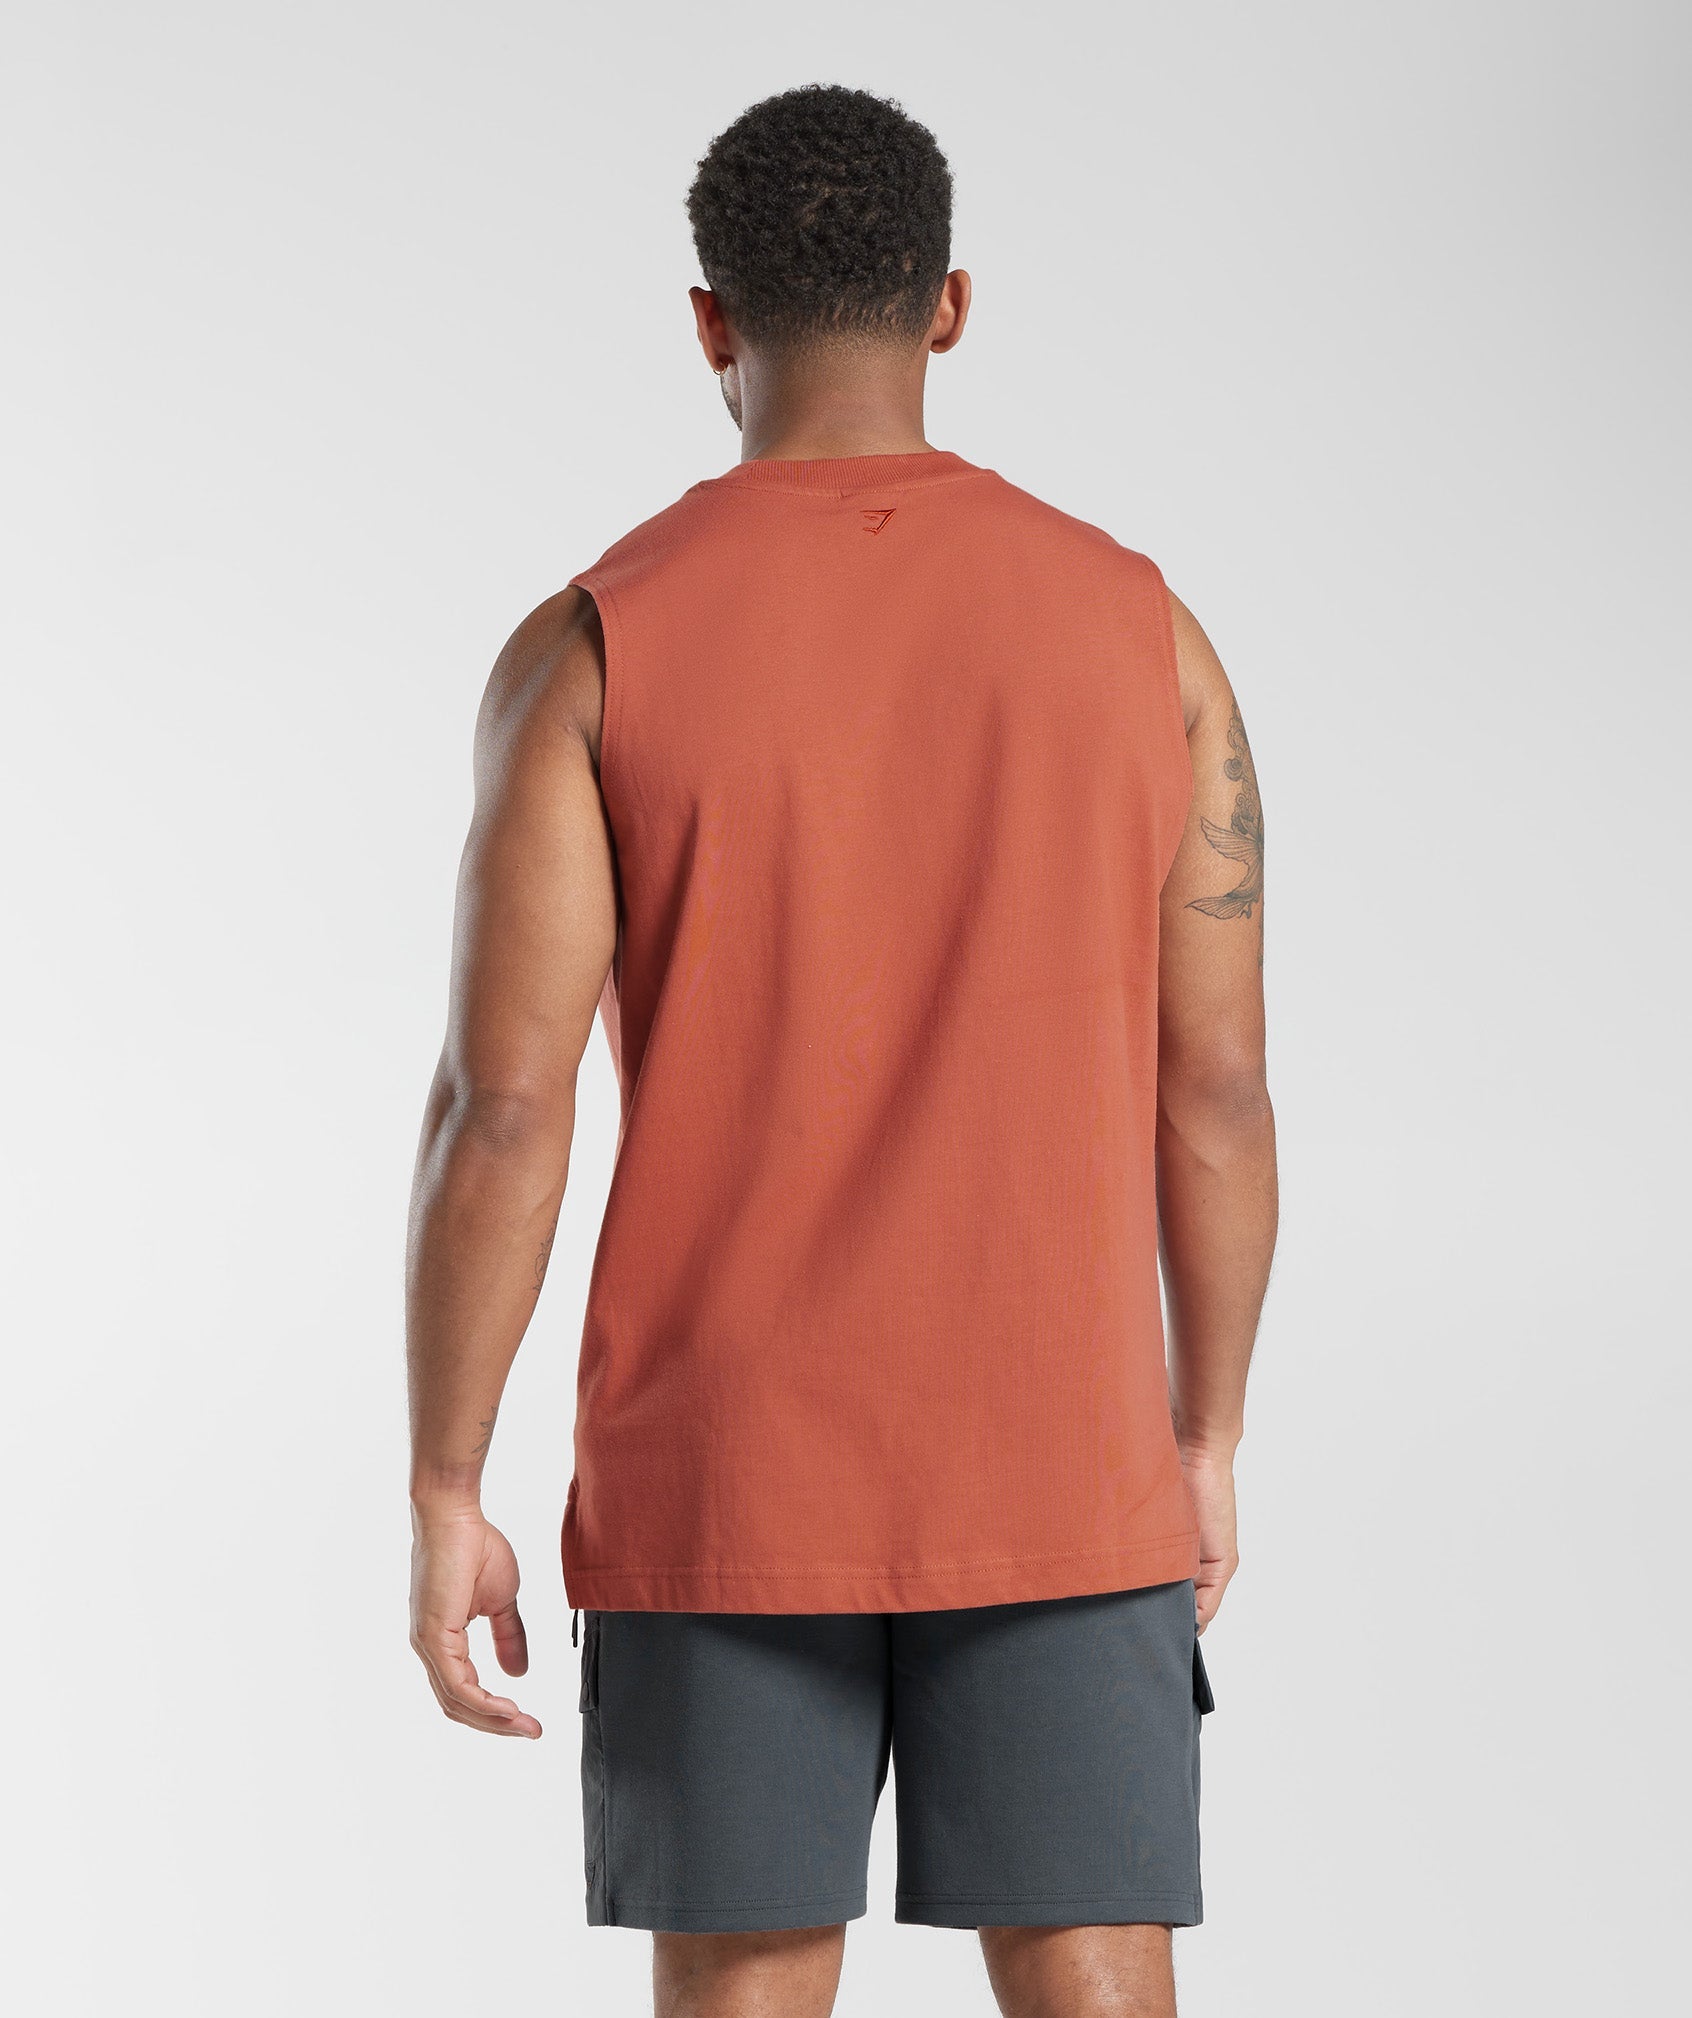 Rest Day Essentials Tank in Persimmon Red - view 2